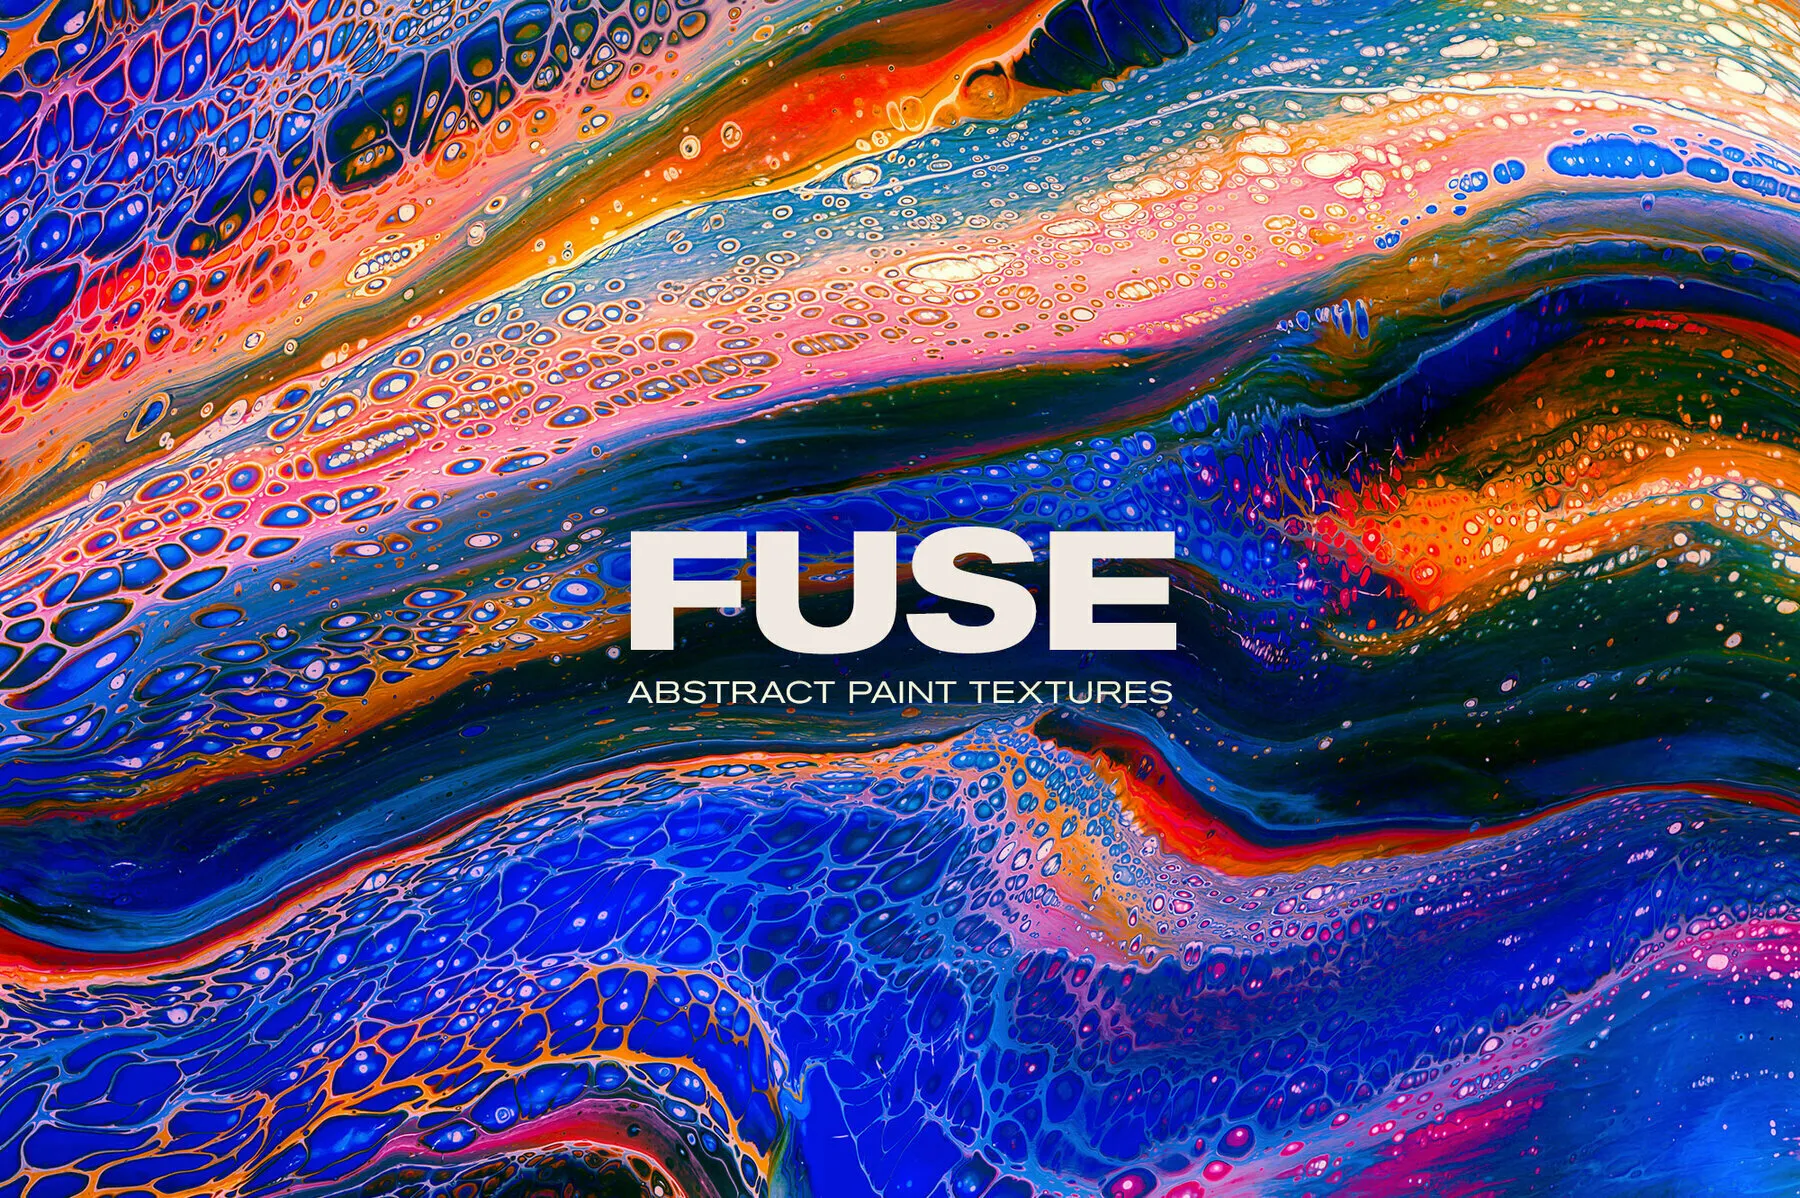 Fuse – Abstract Paint Textures